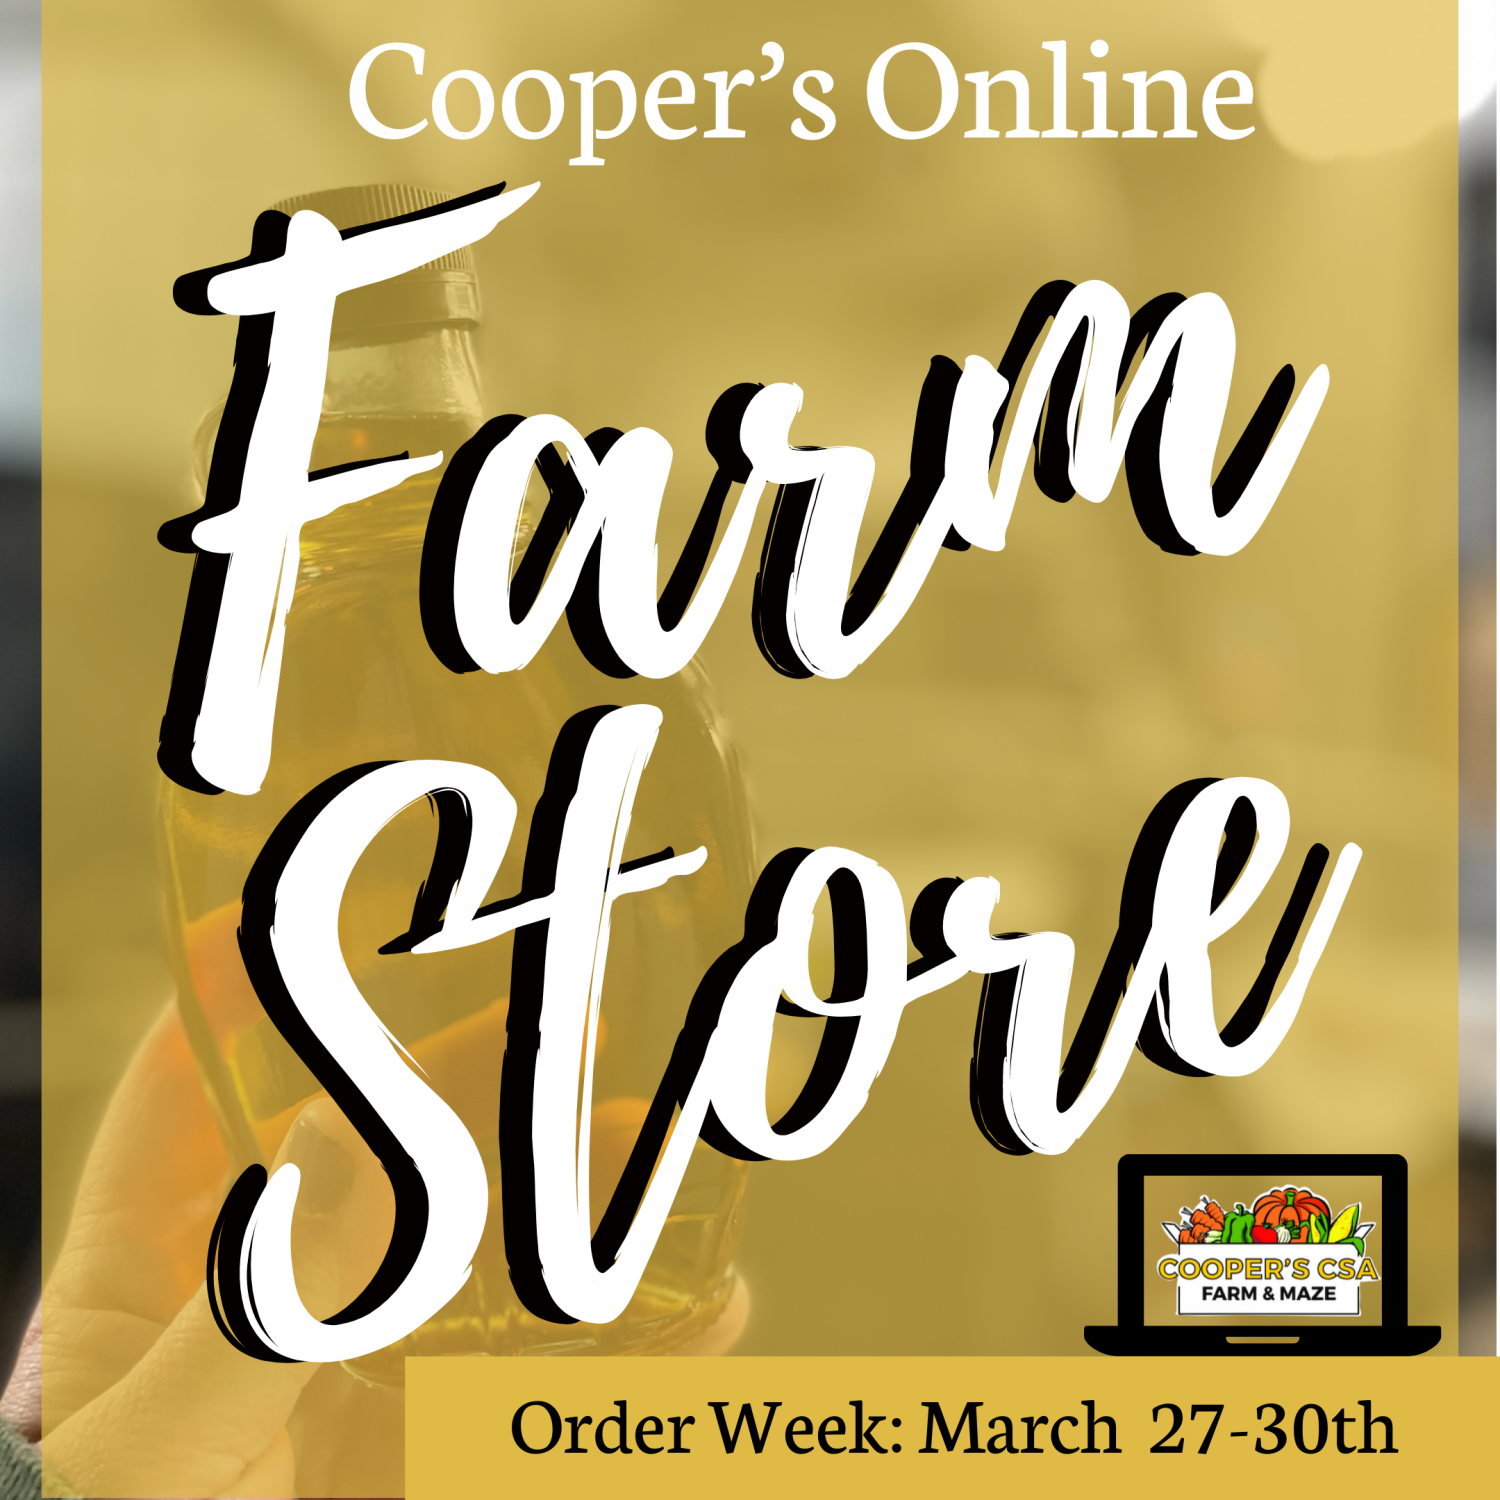 Next Happening: Coopers Online Farm Stand- Order Week March 27-30th